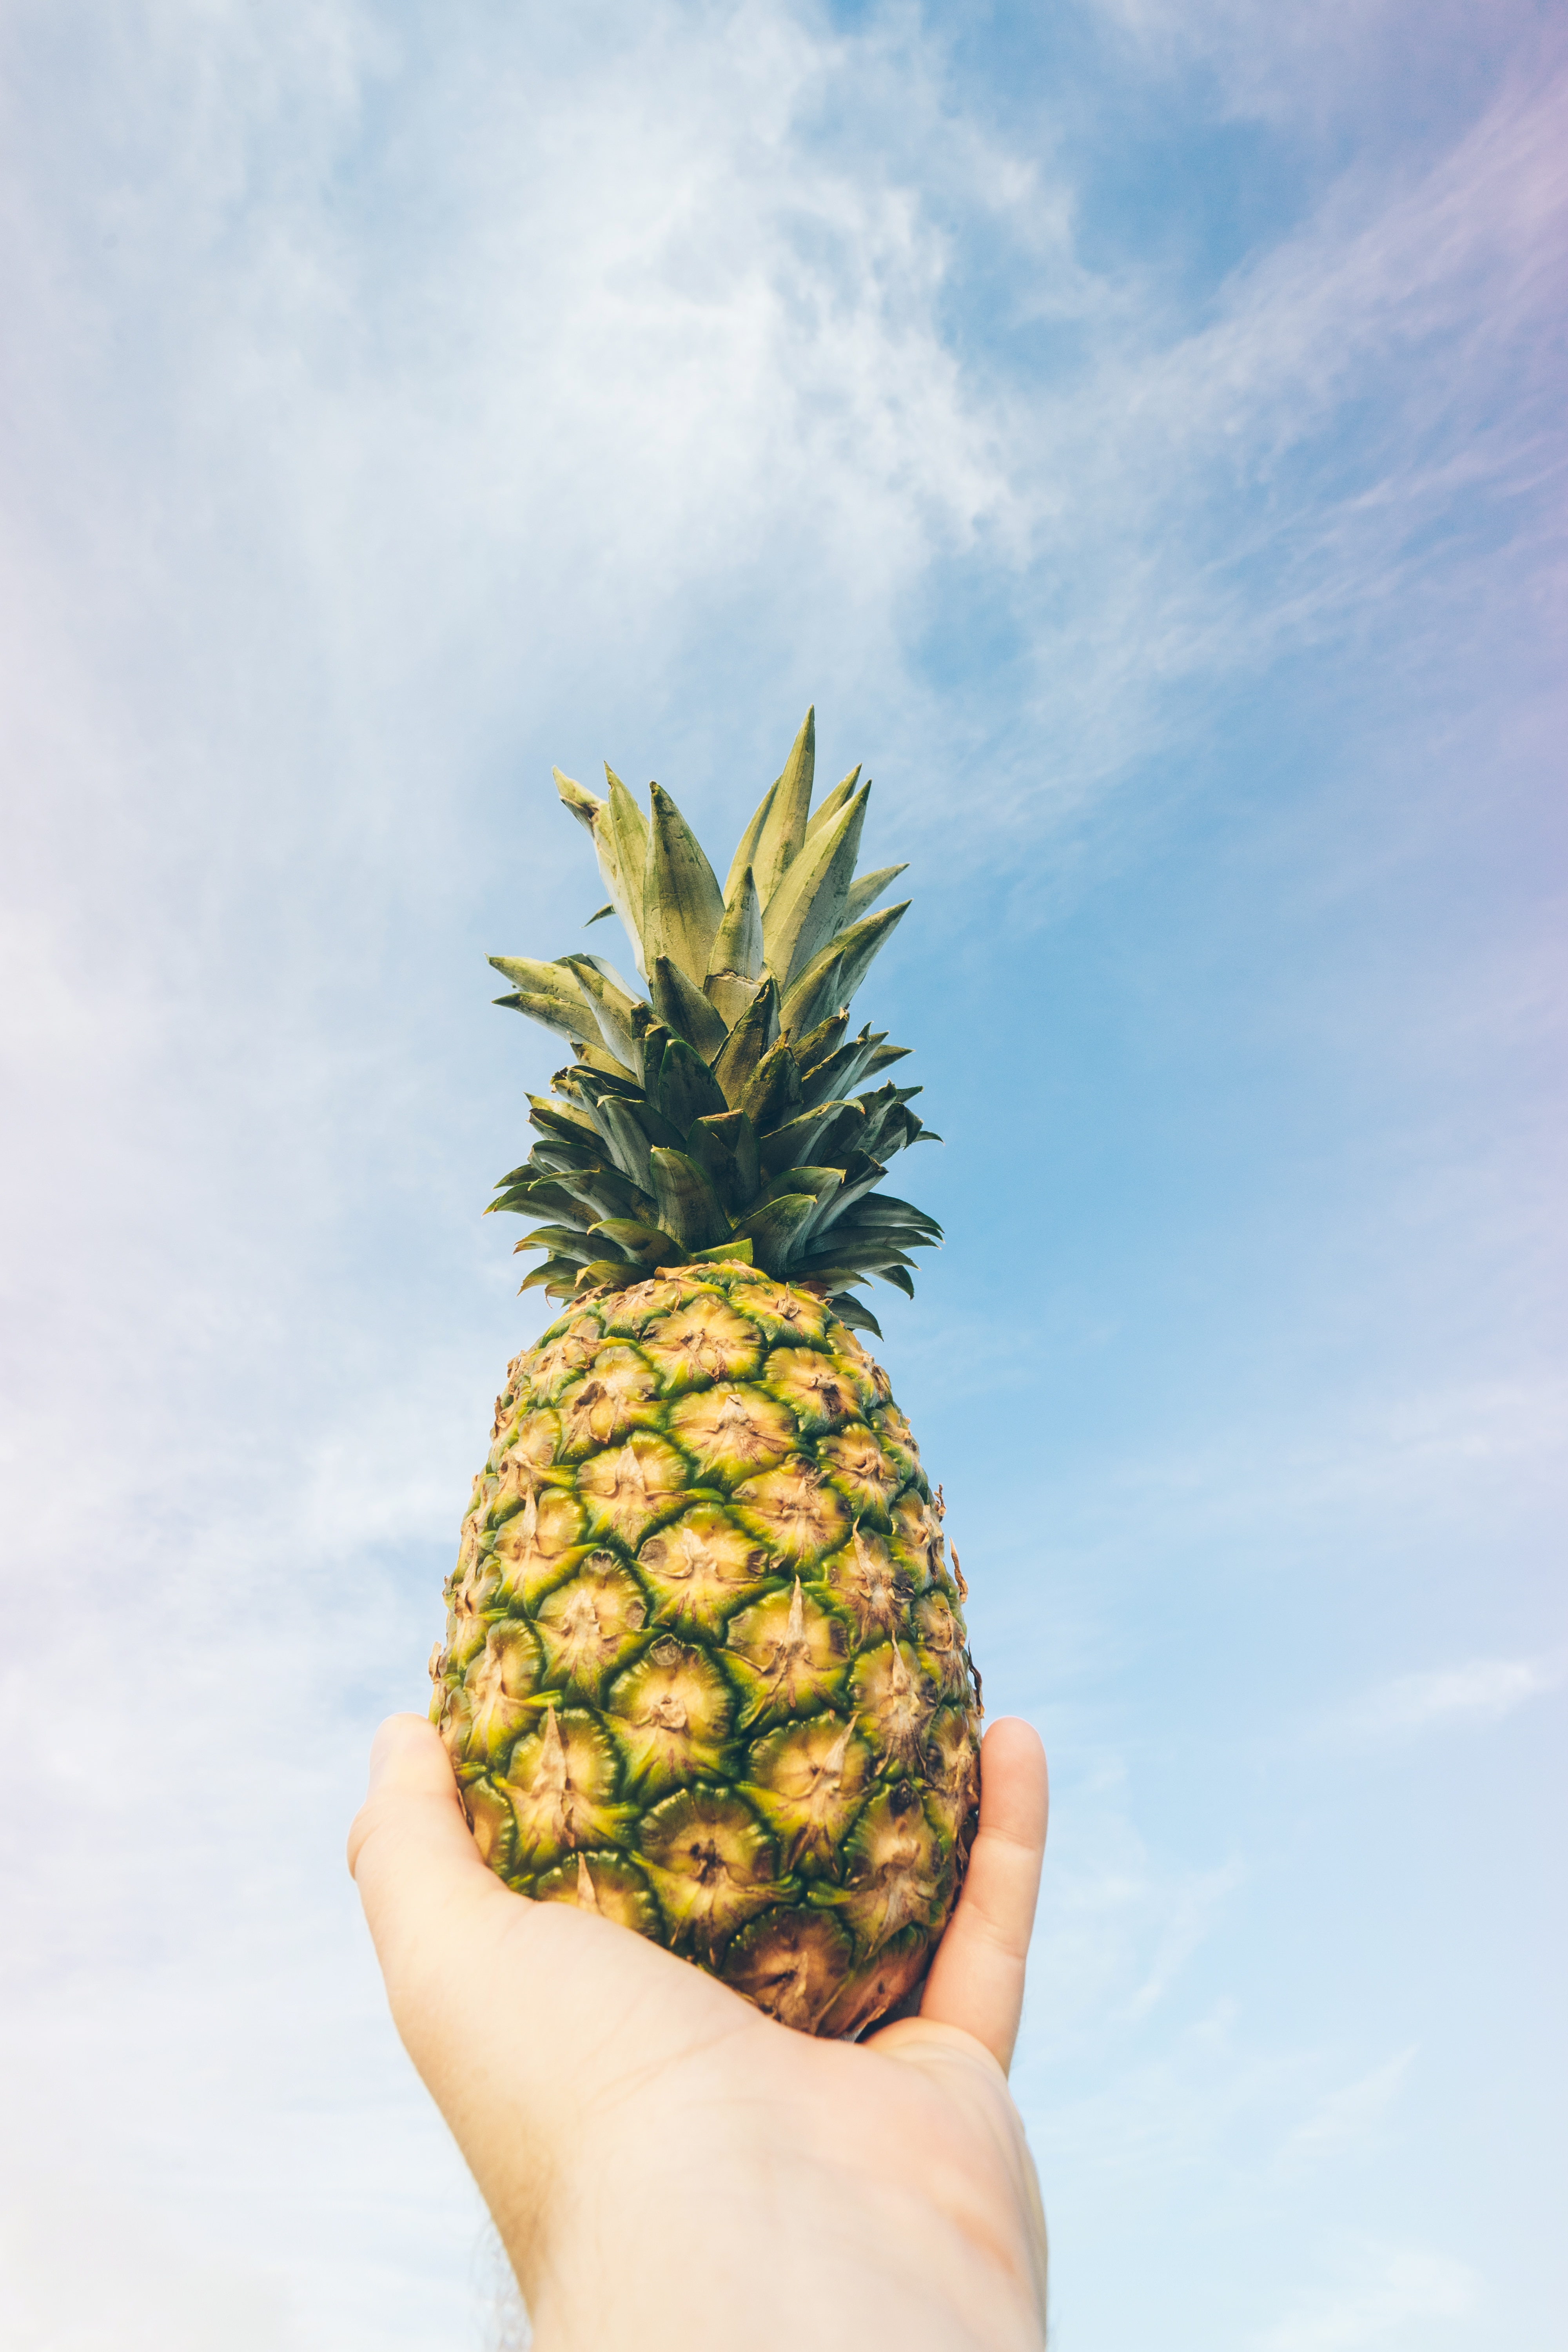 low angle photo of green and yellow pineapple under white and blue cloudy sky during daytime